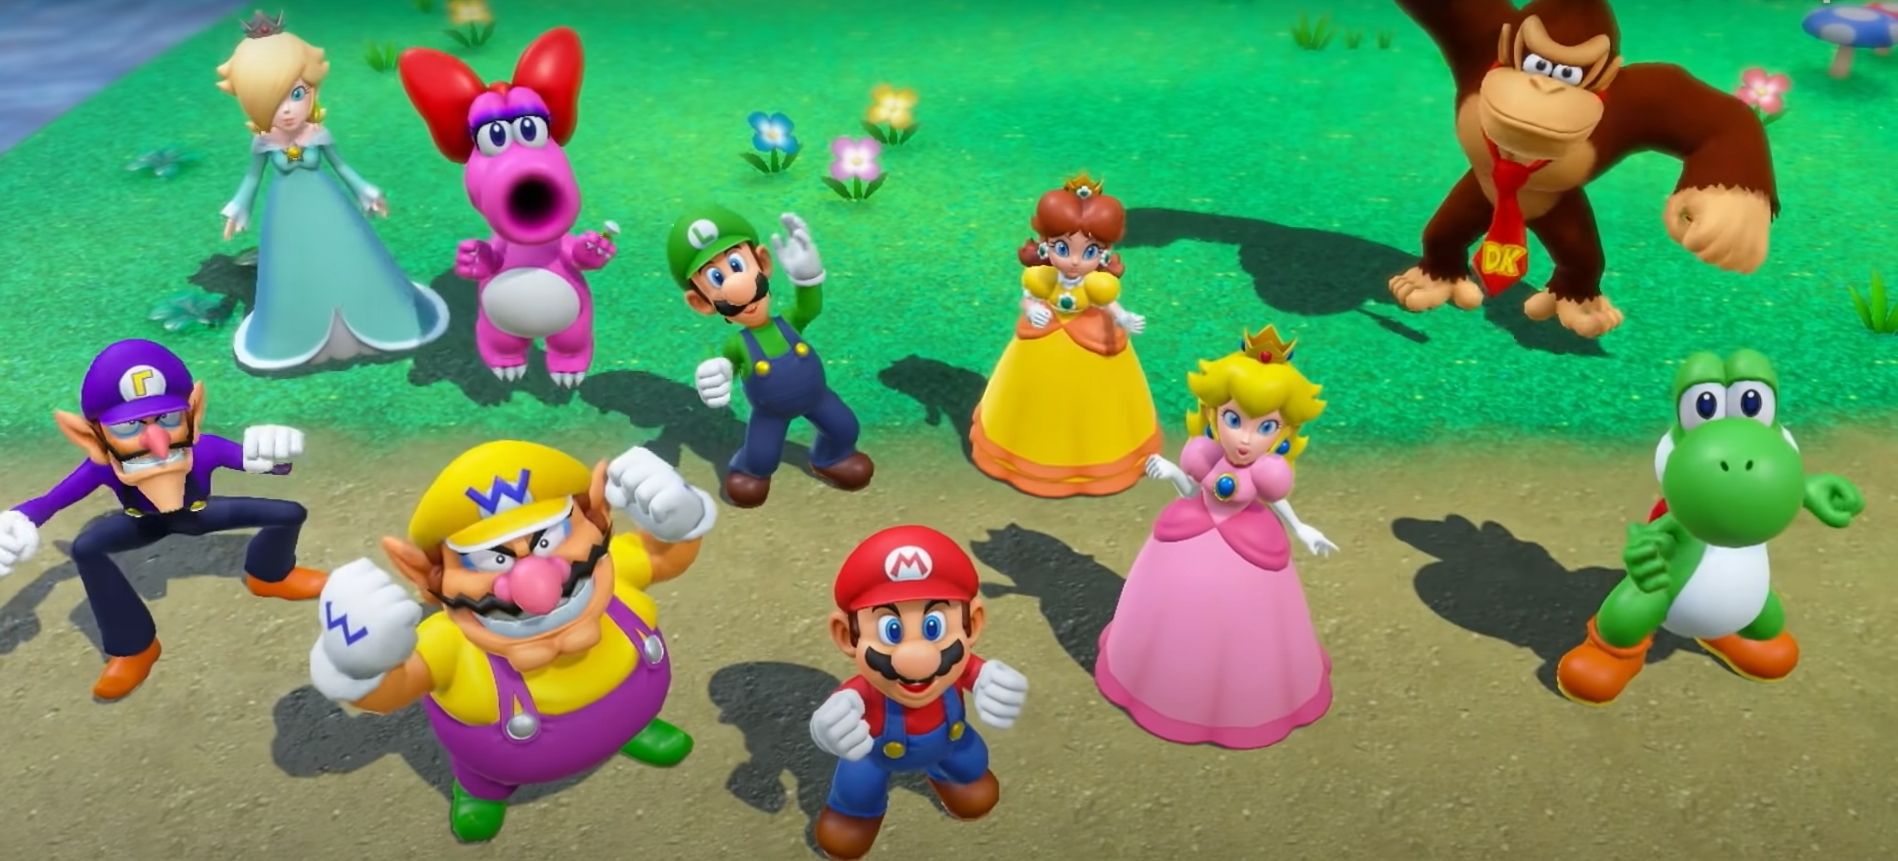 Mario Party Superstars DLC Can Fix The Game’s Biggest Problems